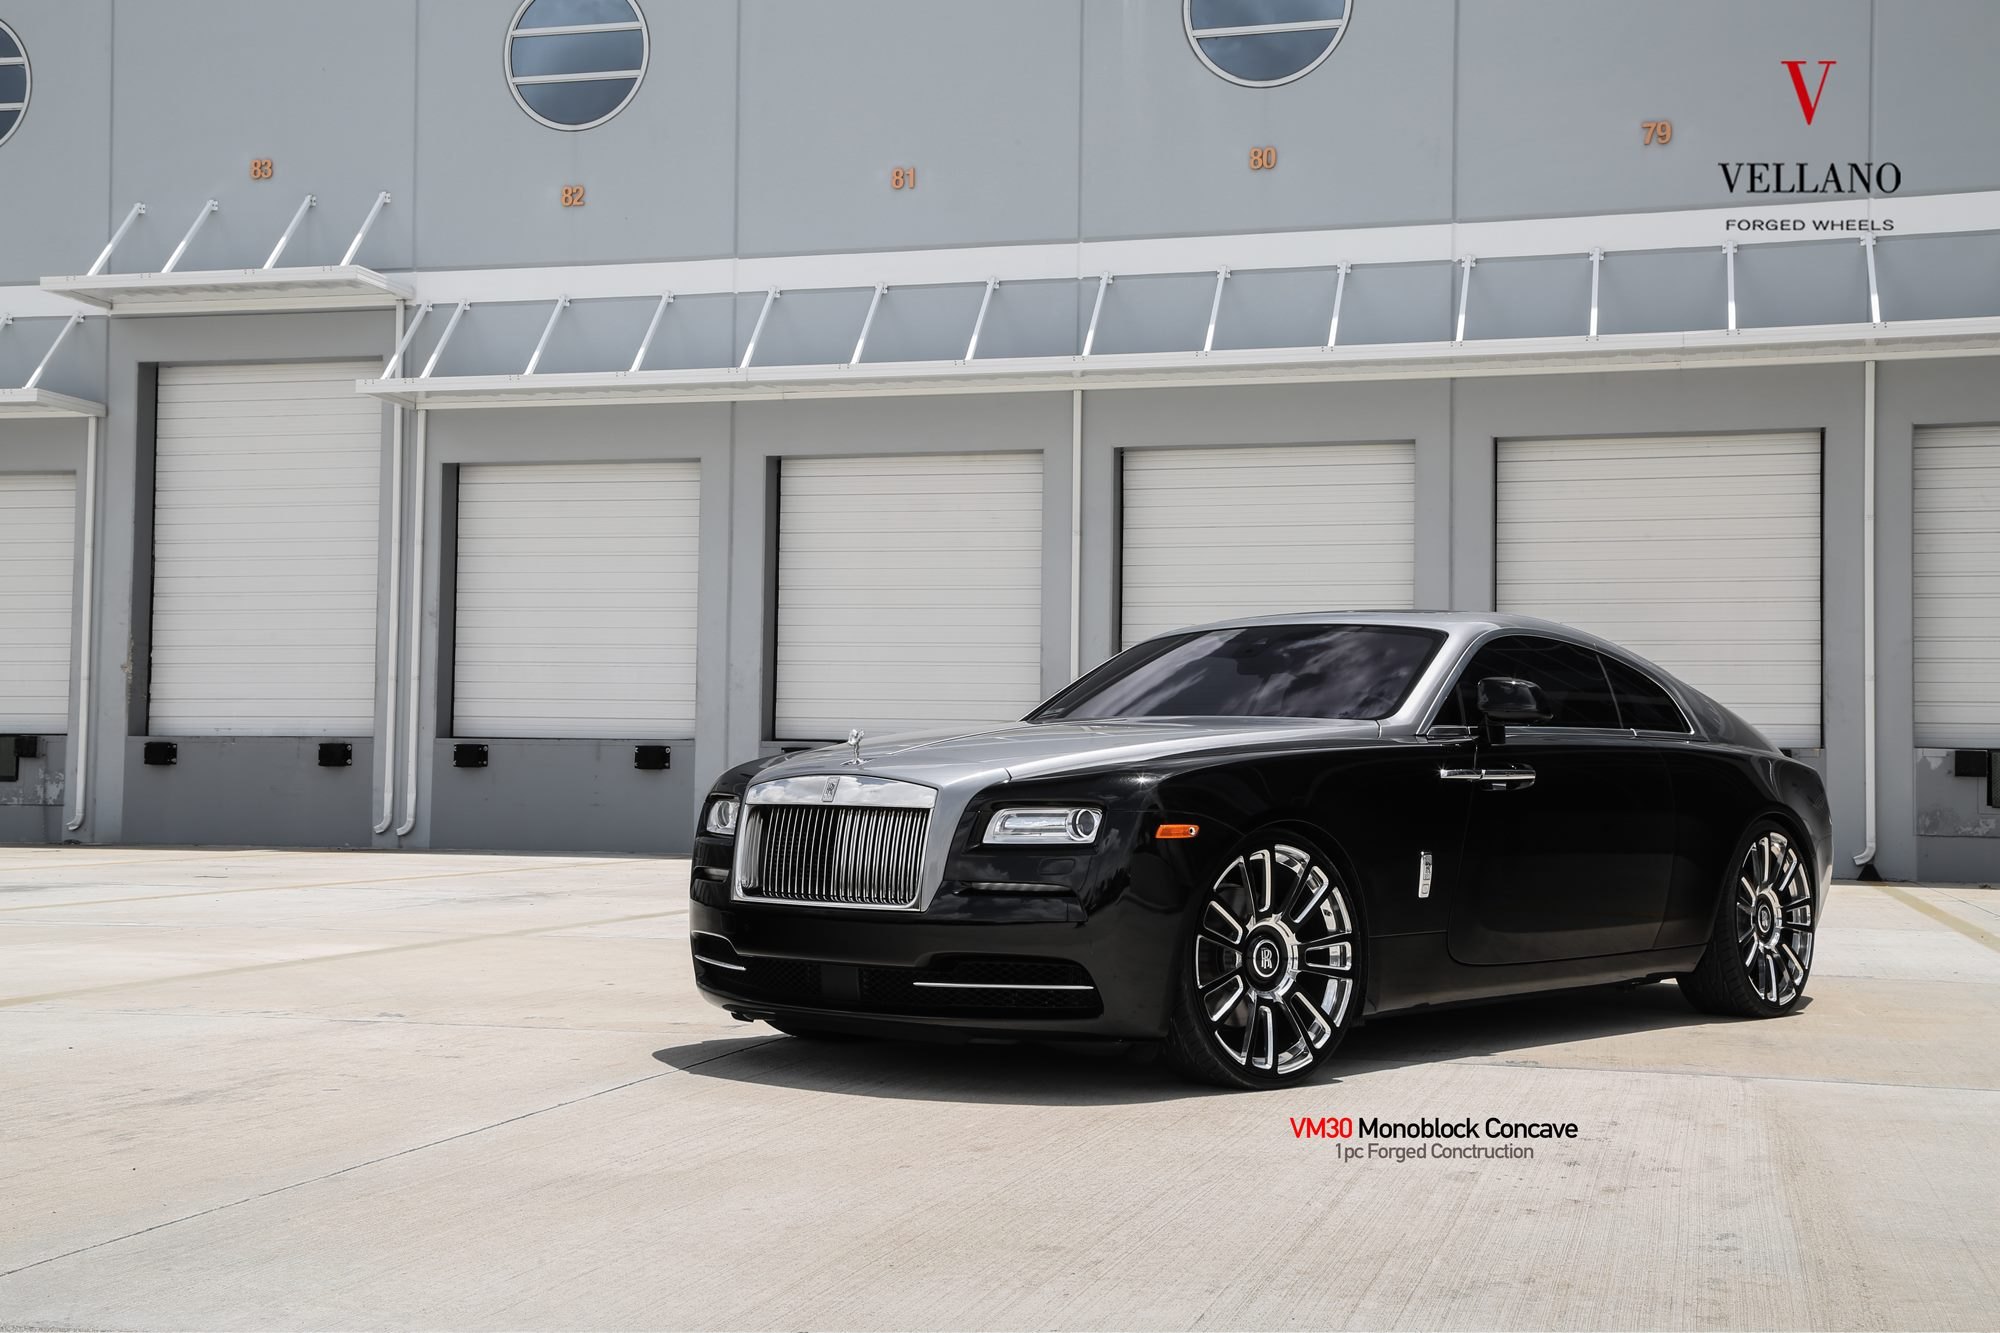 Black Rolls Royce Wraith with Aftermarket Chrome Grille - Photo by Vellano